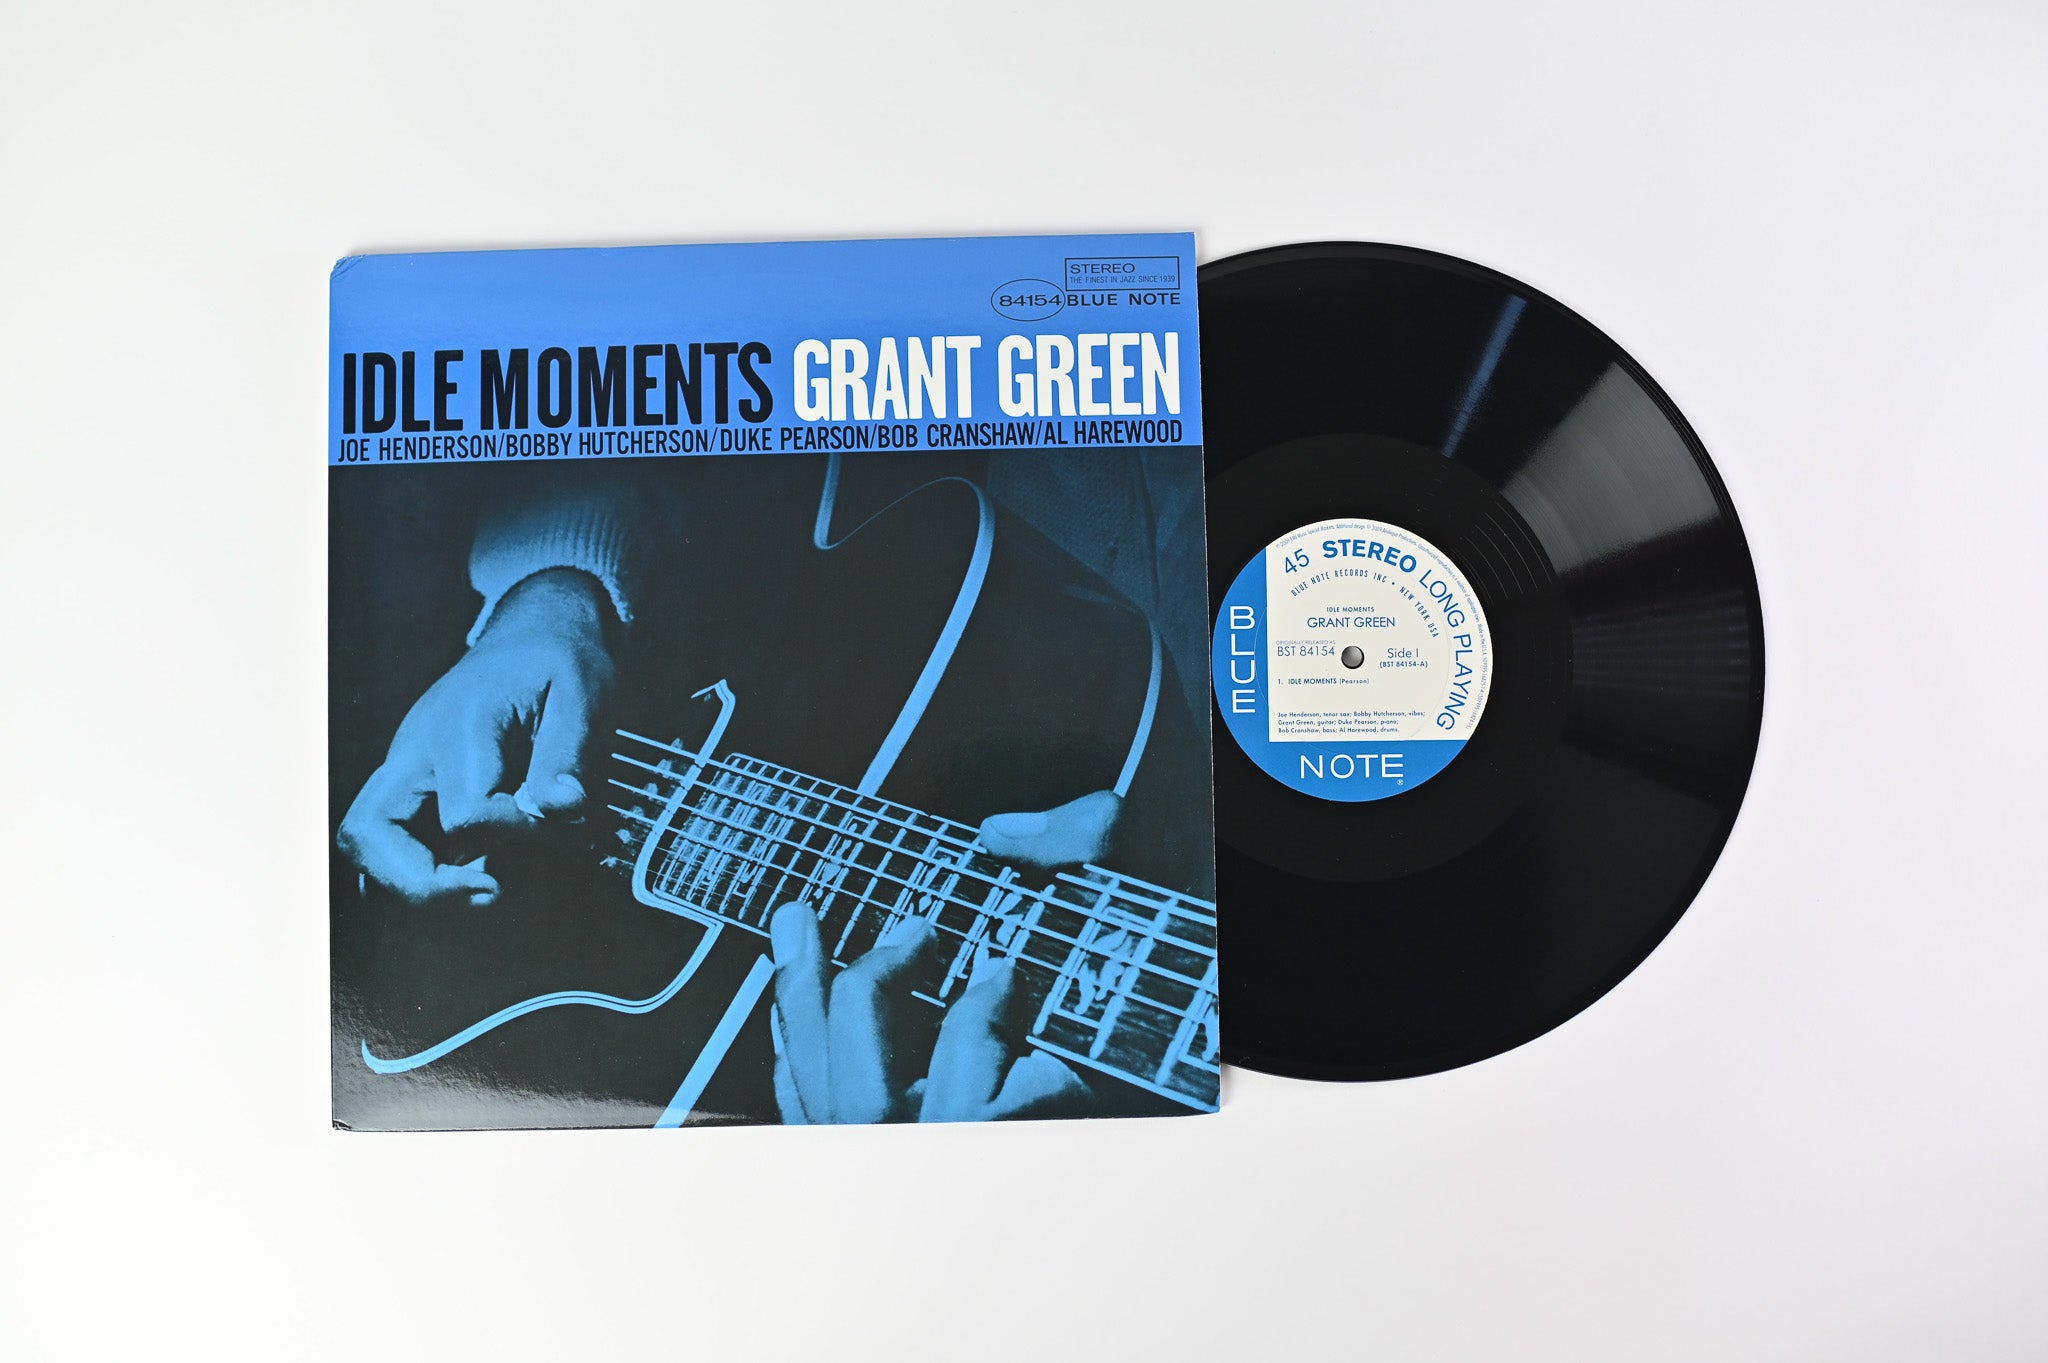 Grant Green - Idle Moments on Blue Note Analogue Productions 45 RPM Reissue